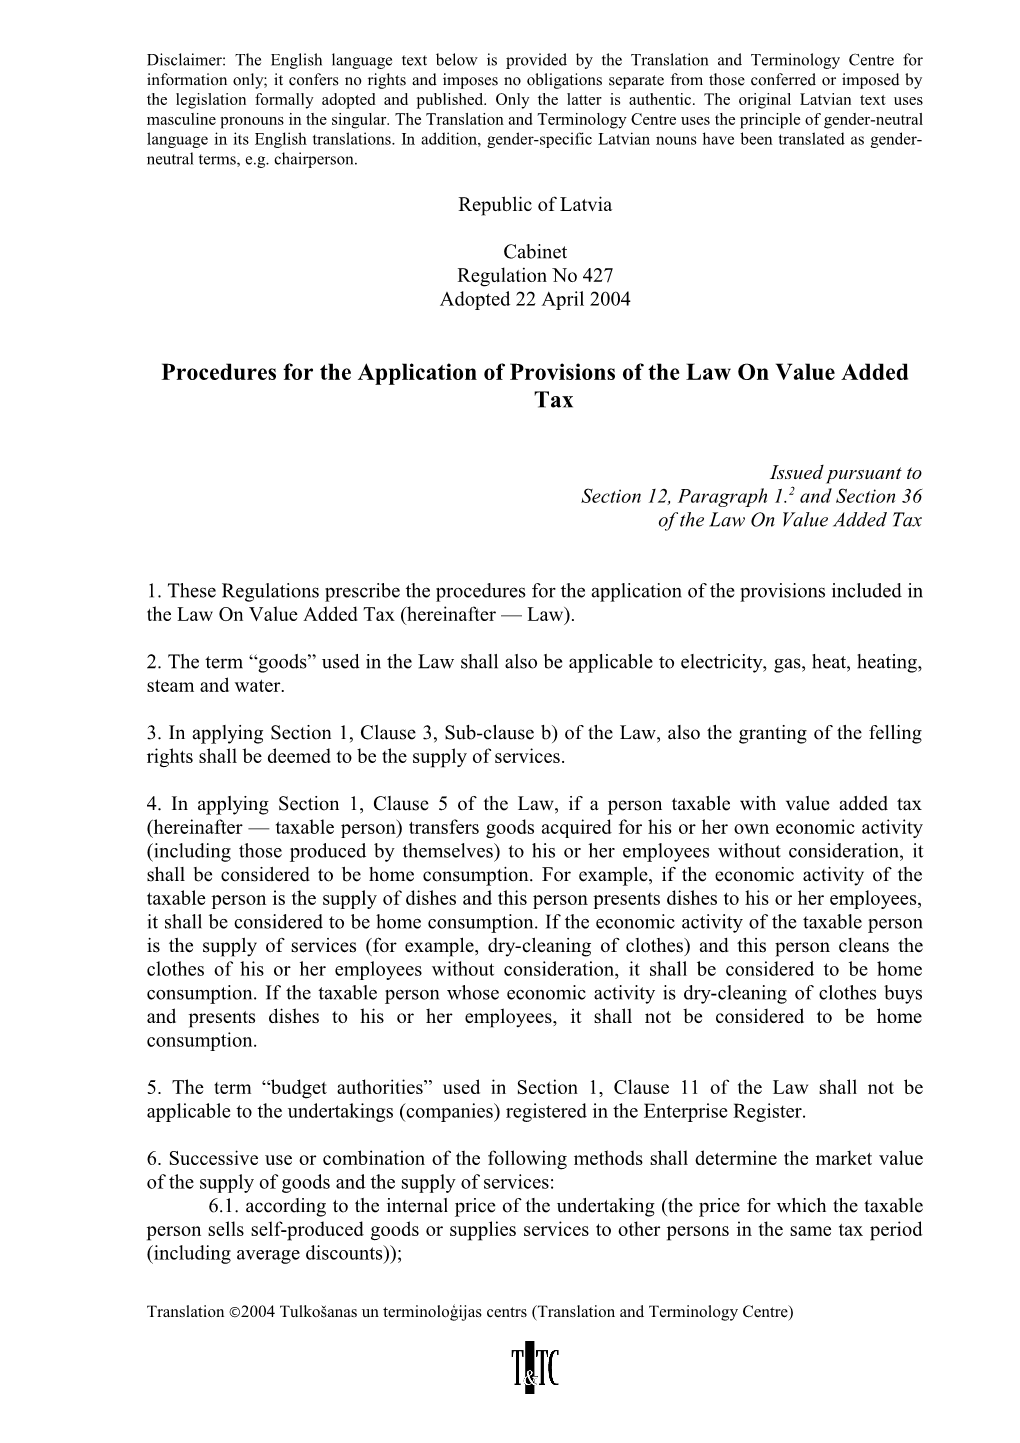 Procedures for the Application of Provisions of the Law on Value Added Tax